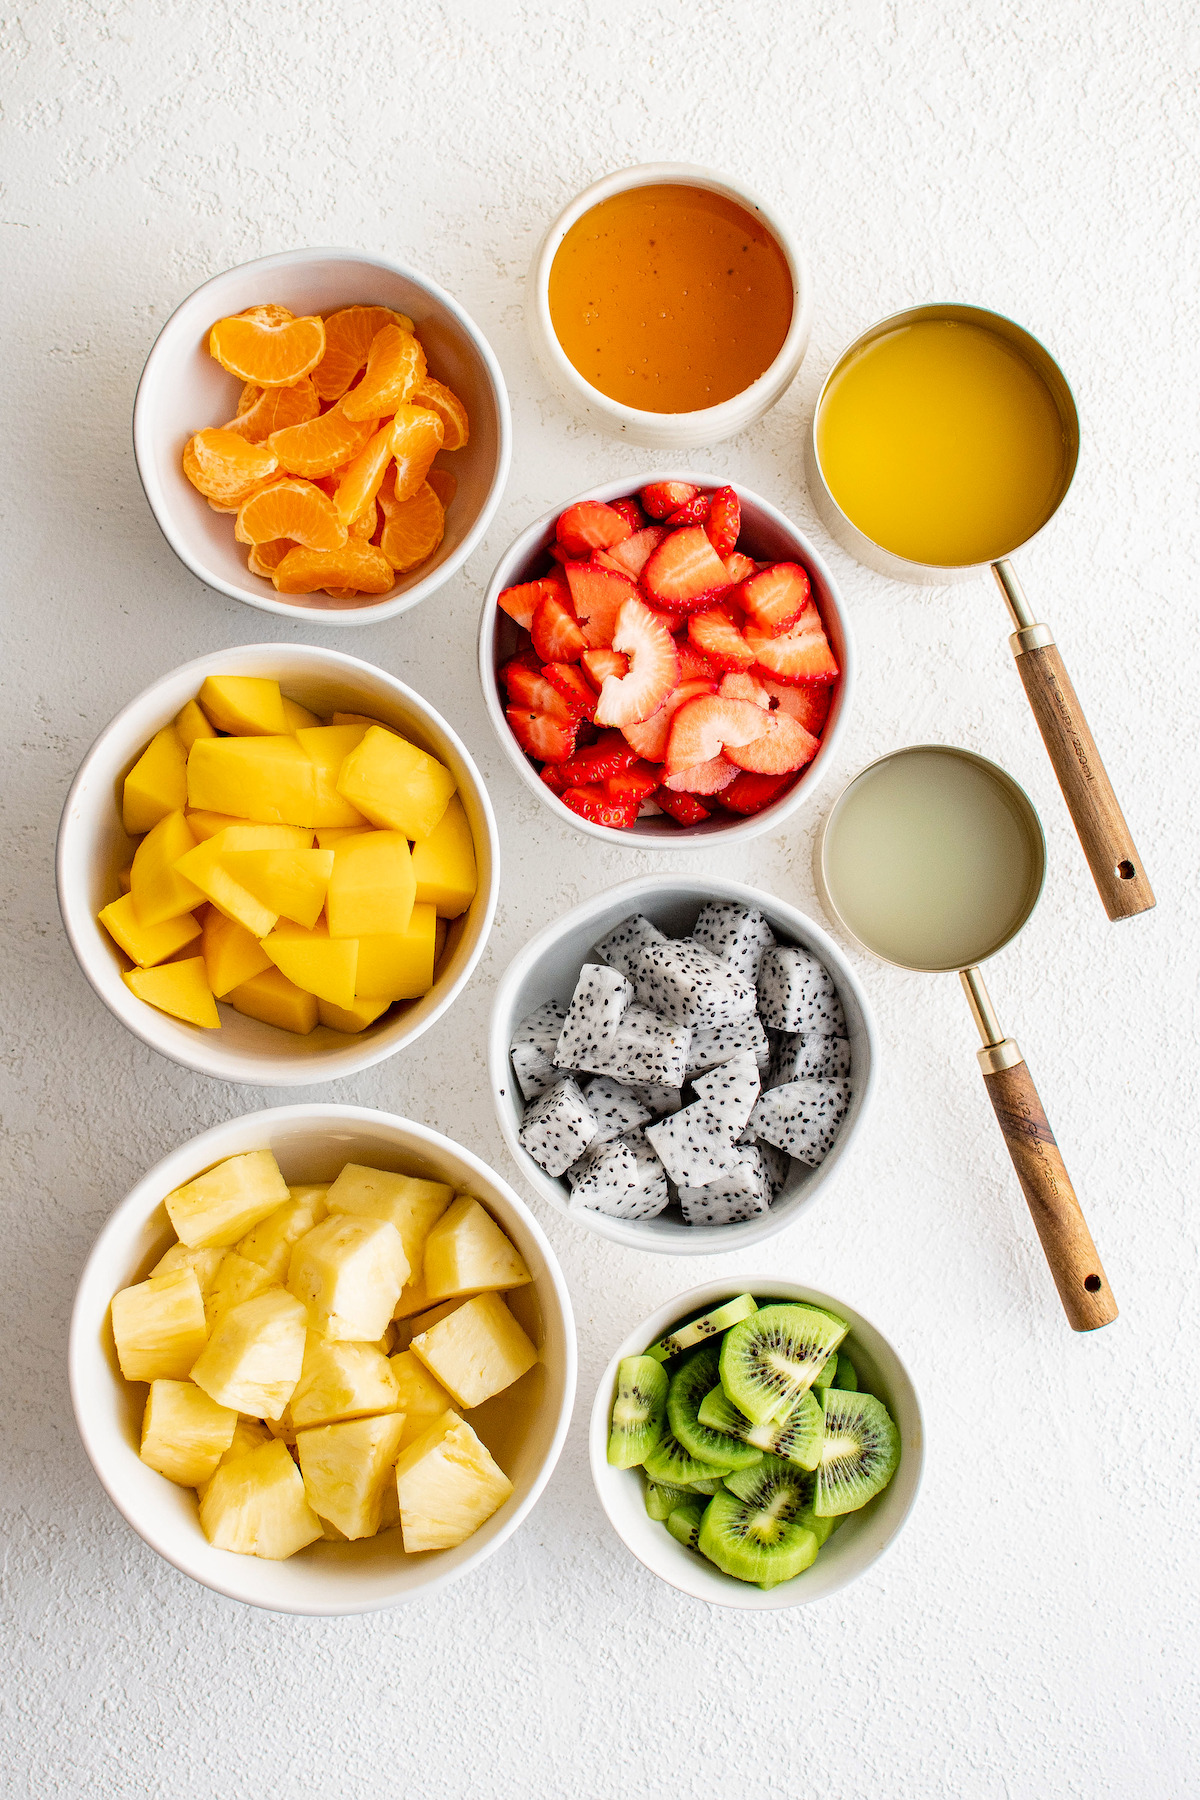 Ingredients for tropical fruit salad arranged on a work surface.